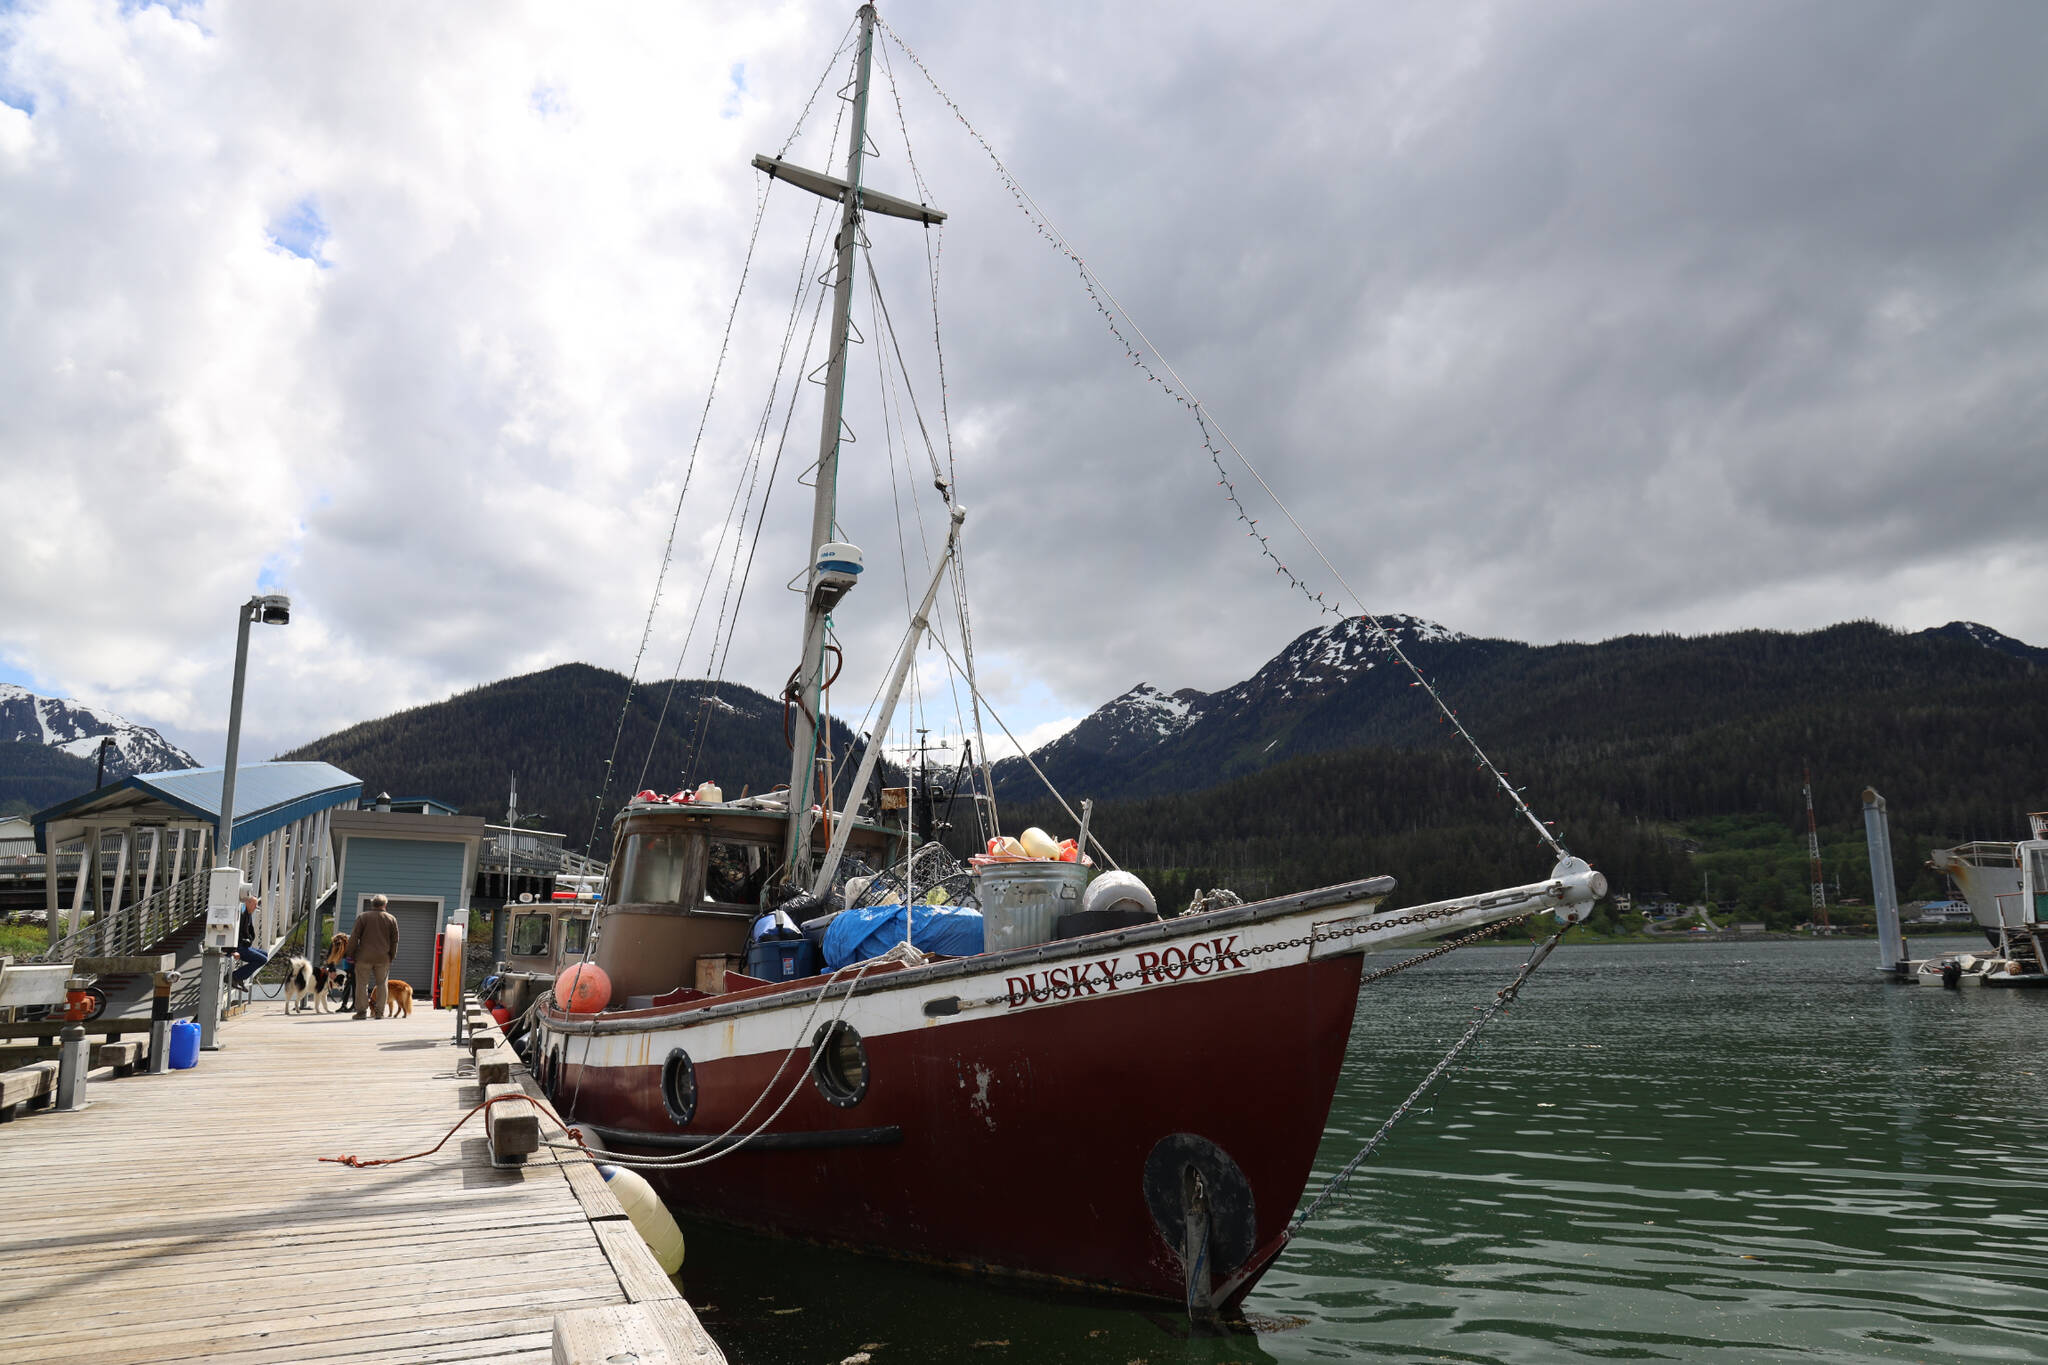 The Dusky Rock sits at Aurora Harbor on Saturday morning. The vessel was towed there from Sandy Beach on Friday evening after three people died within a three-day period aboard the vessel while anchored offshore. (Clarise Larson / Juneau Empire)